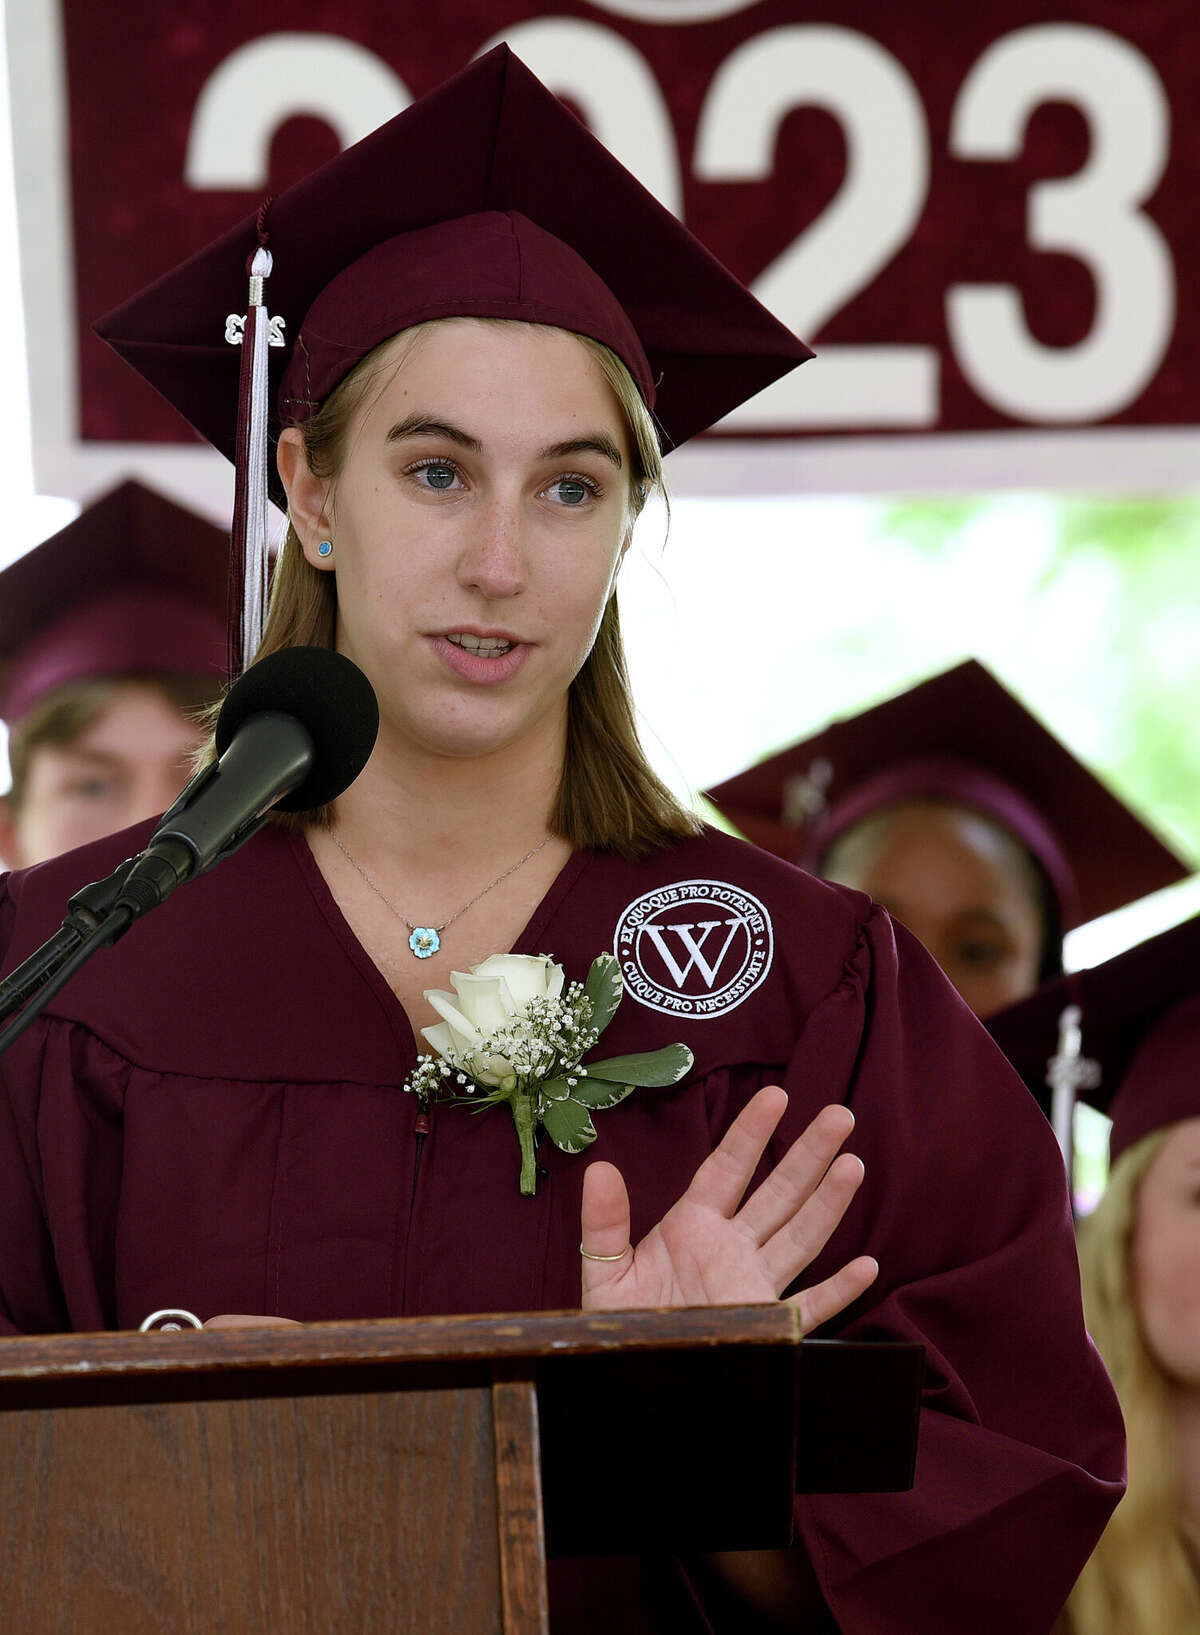 Graduates from Danbury's Wooster School look to the future